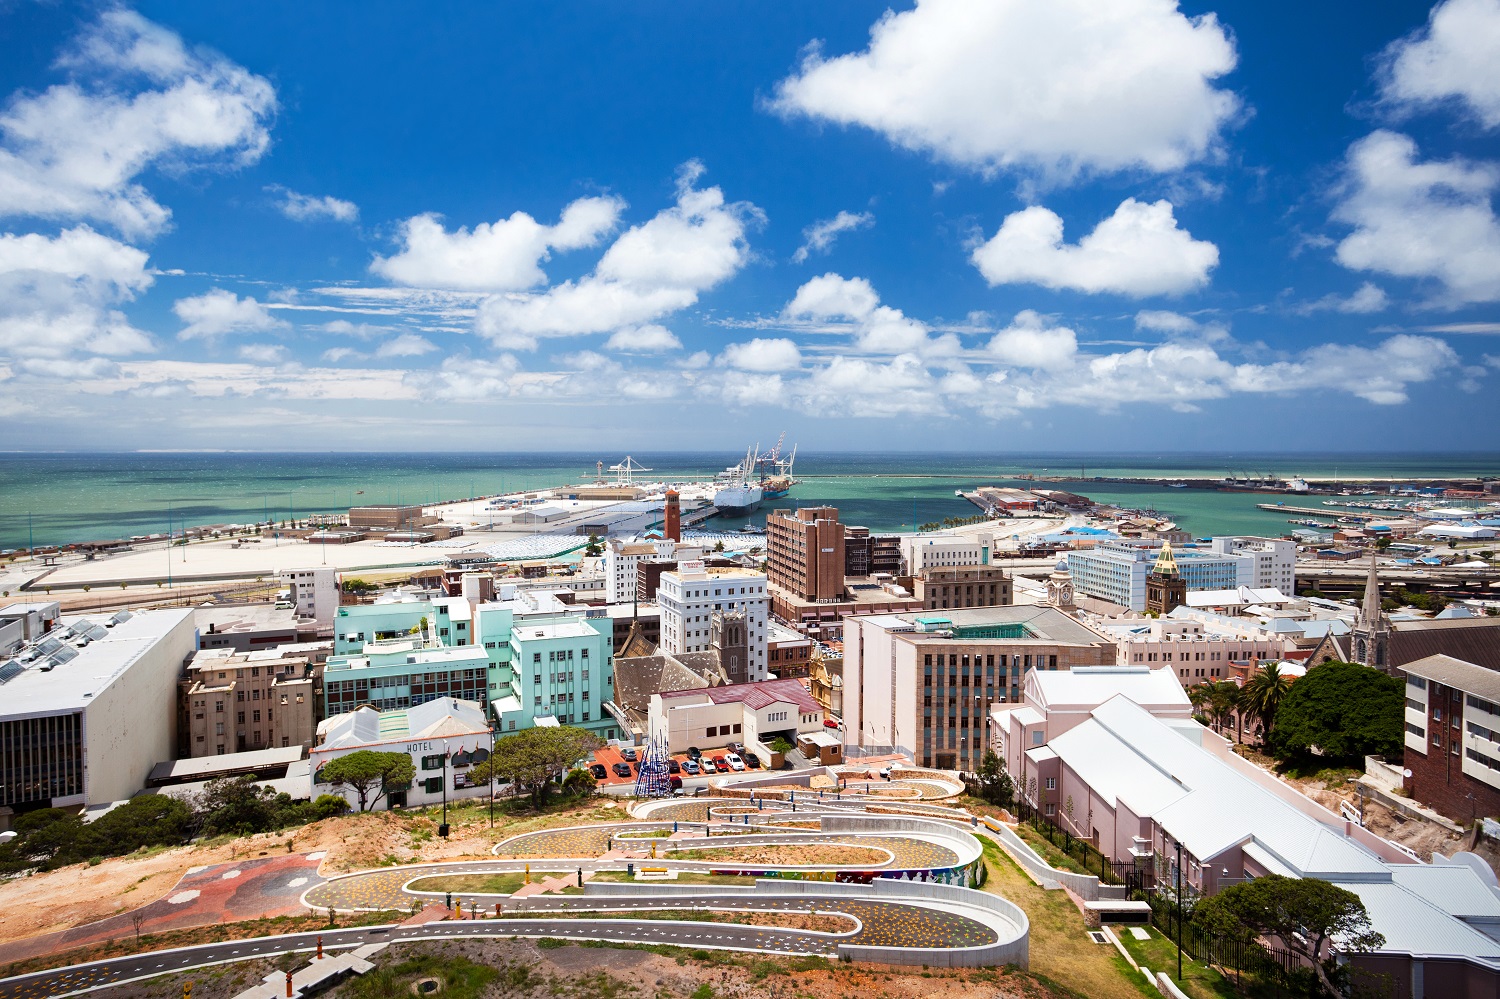 cityscape of Port Elizabeth, South Africa